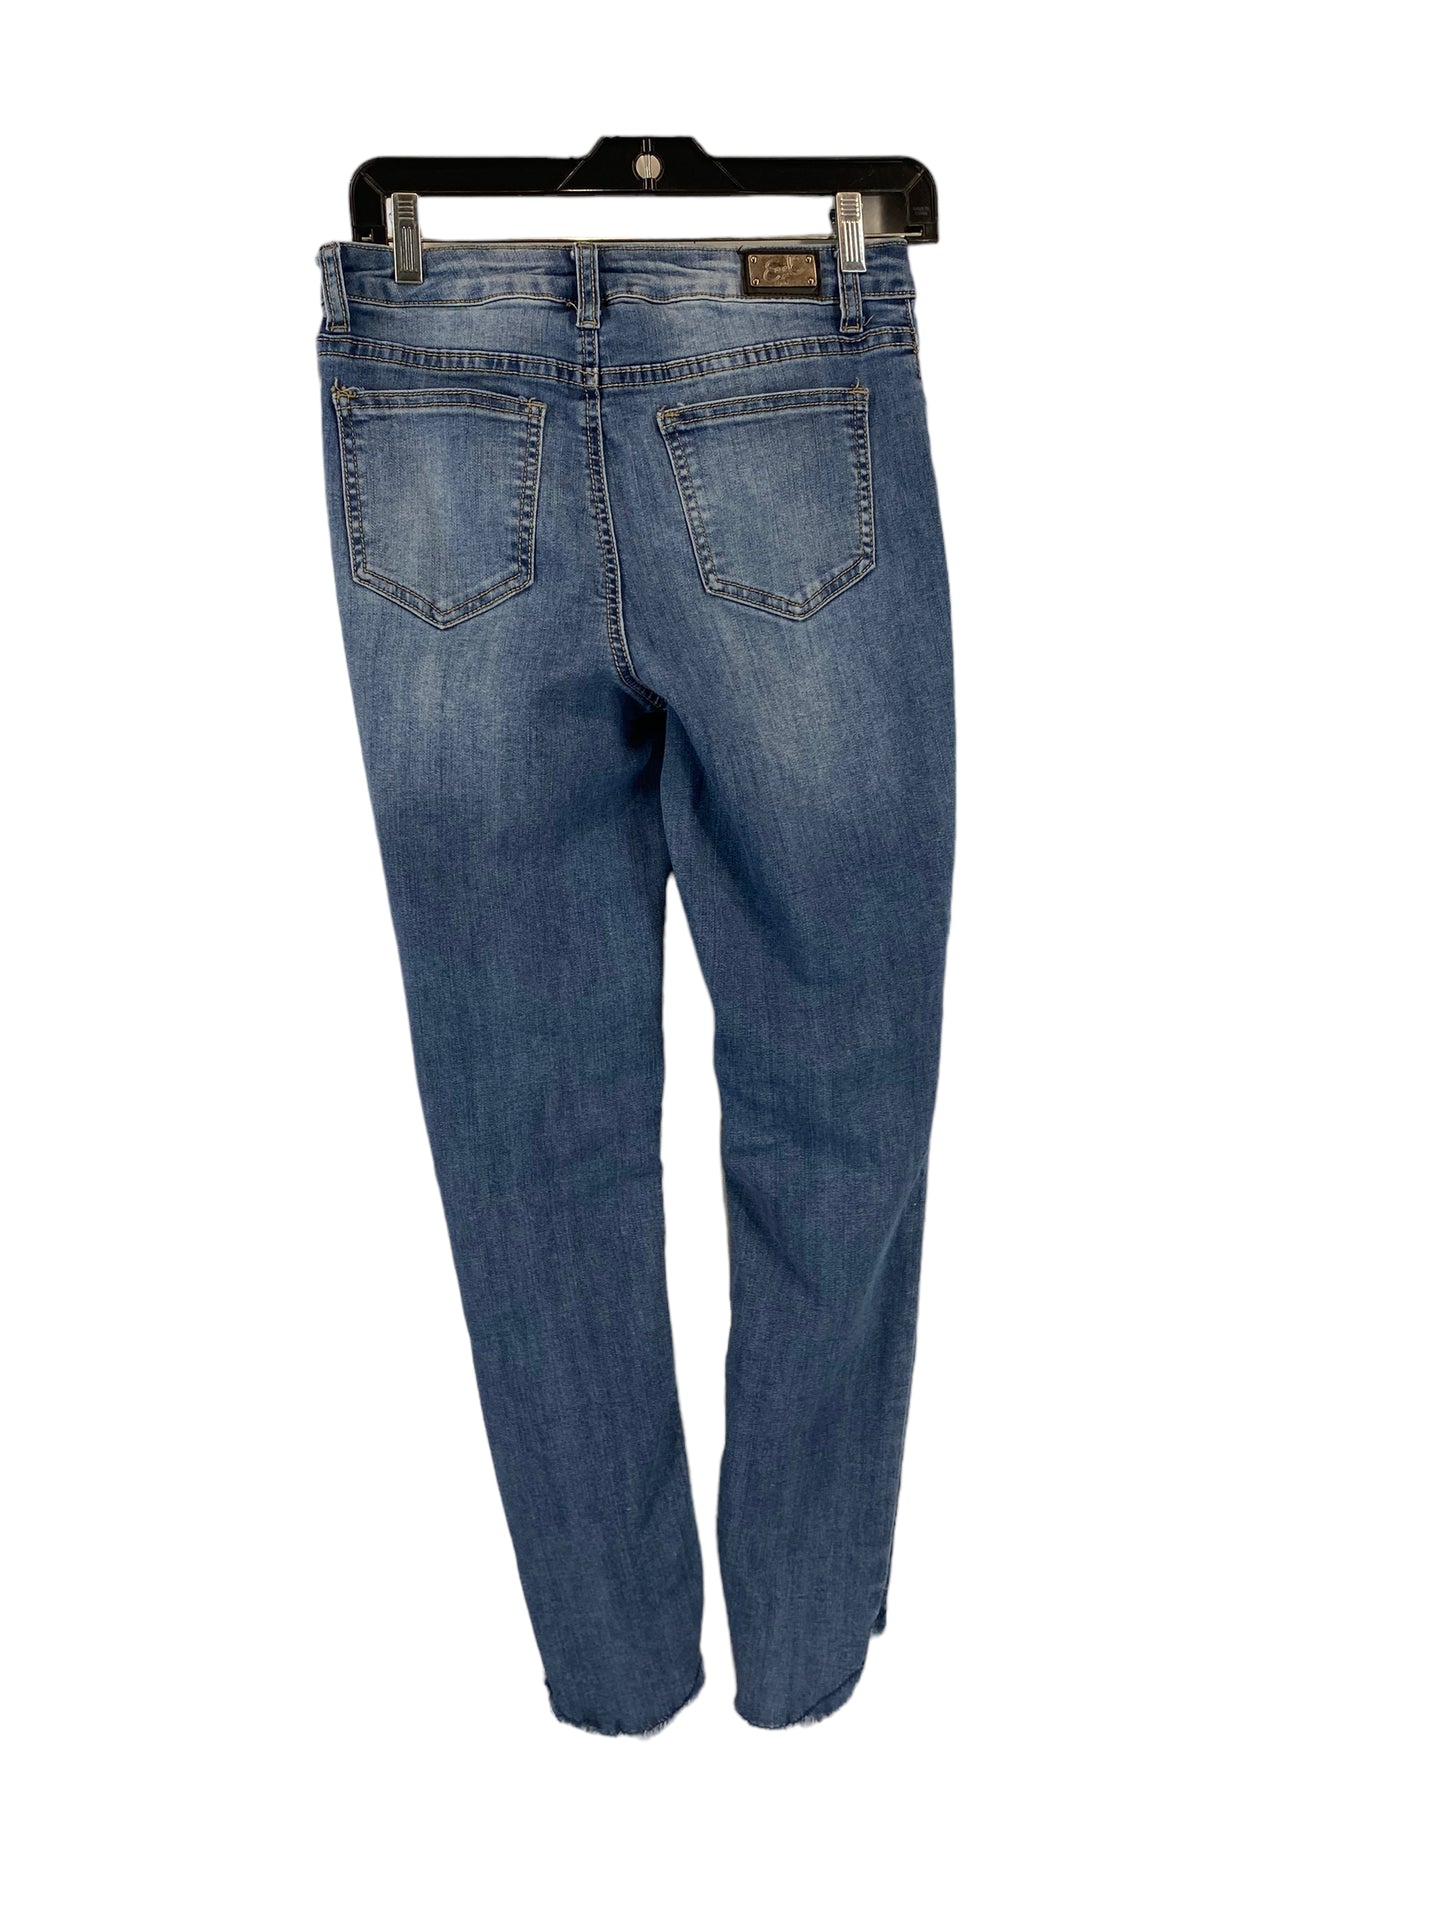 Jeans Skinny By Easel  Size: 6